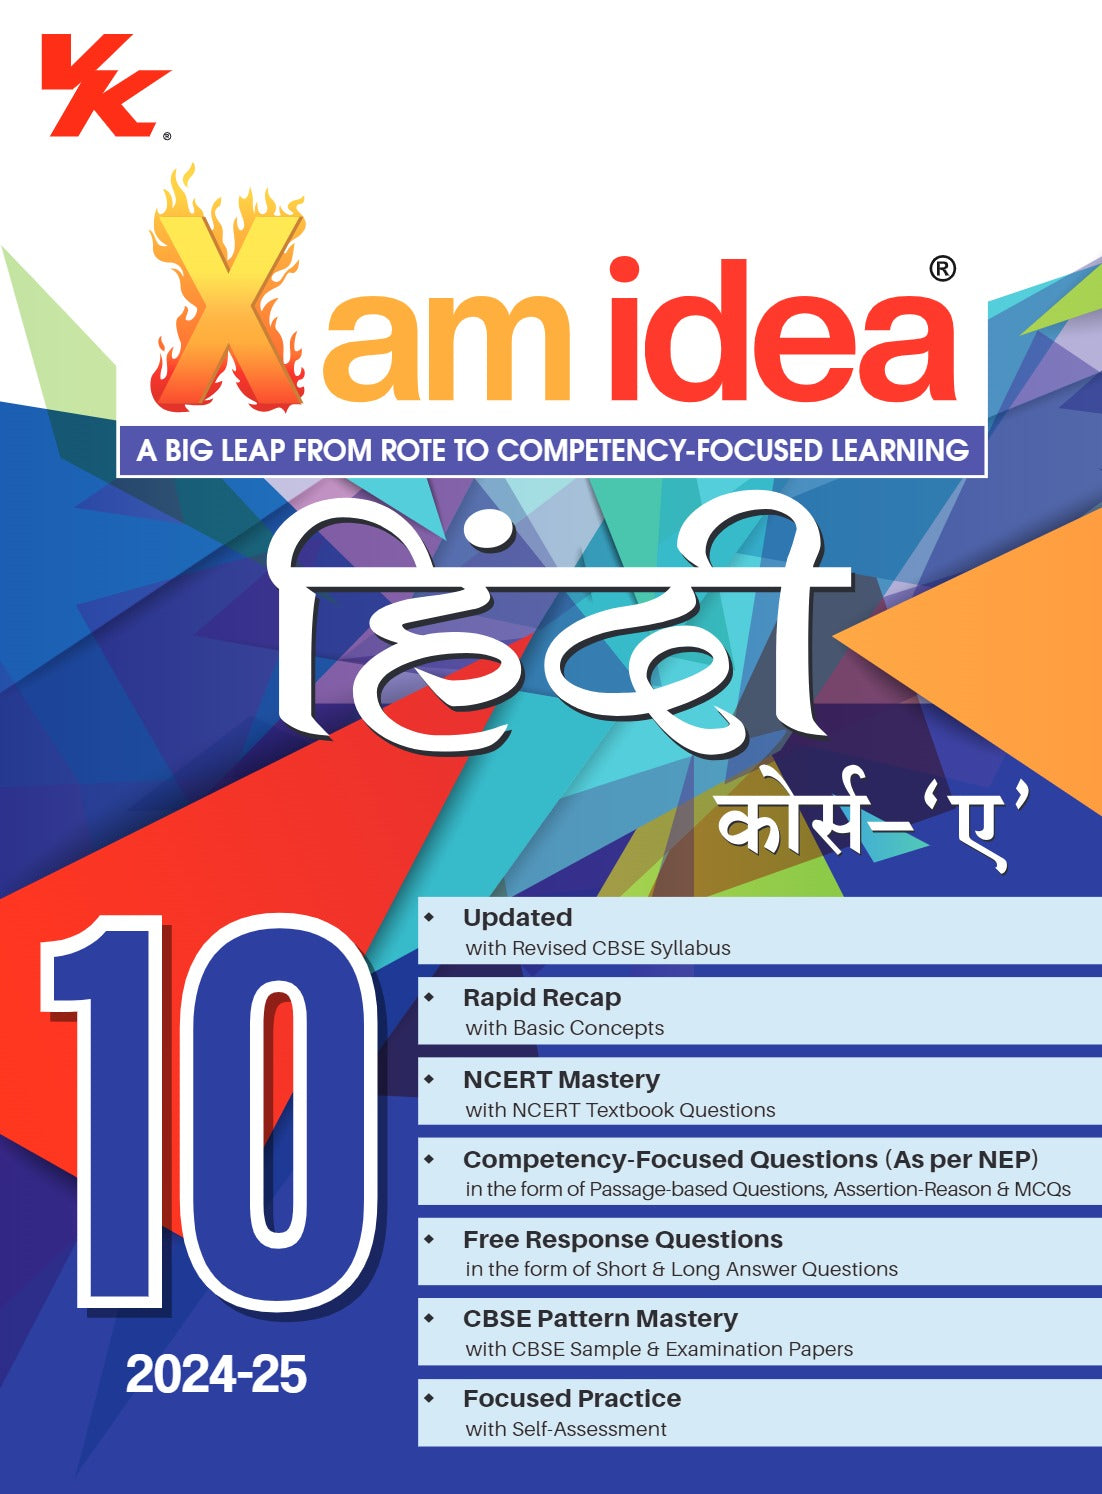 Xam idea Hindi Course A Class 10 Book | CBSE Board | Chapterwise Question Bank | Based on Revised CBSE Syllabus | NCERT Questions Included | 2024-25 Exam